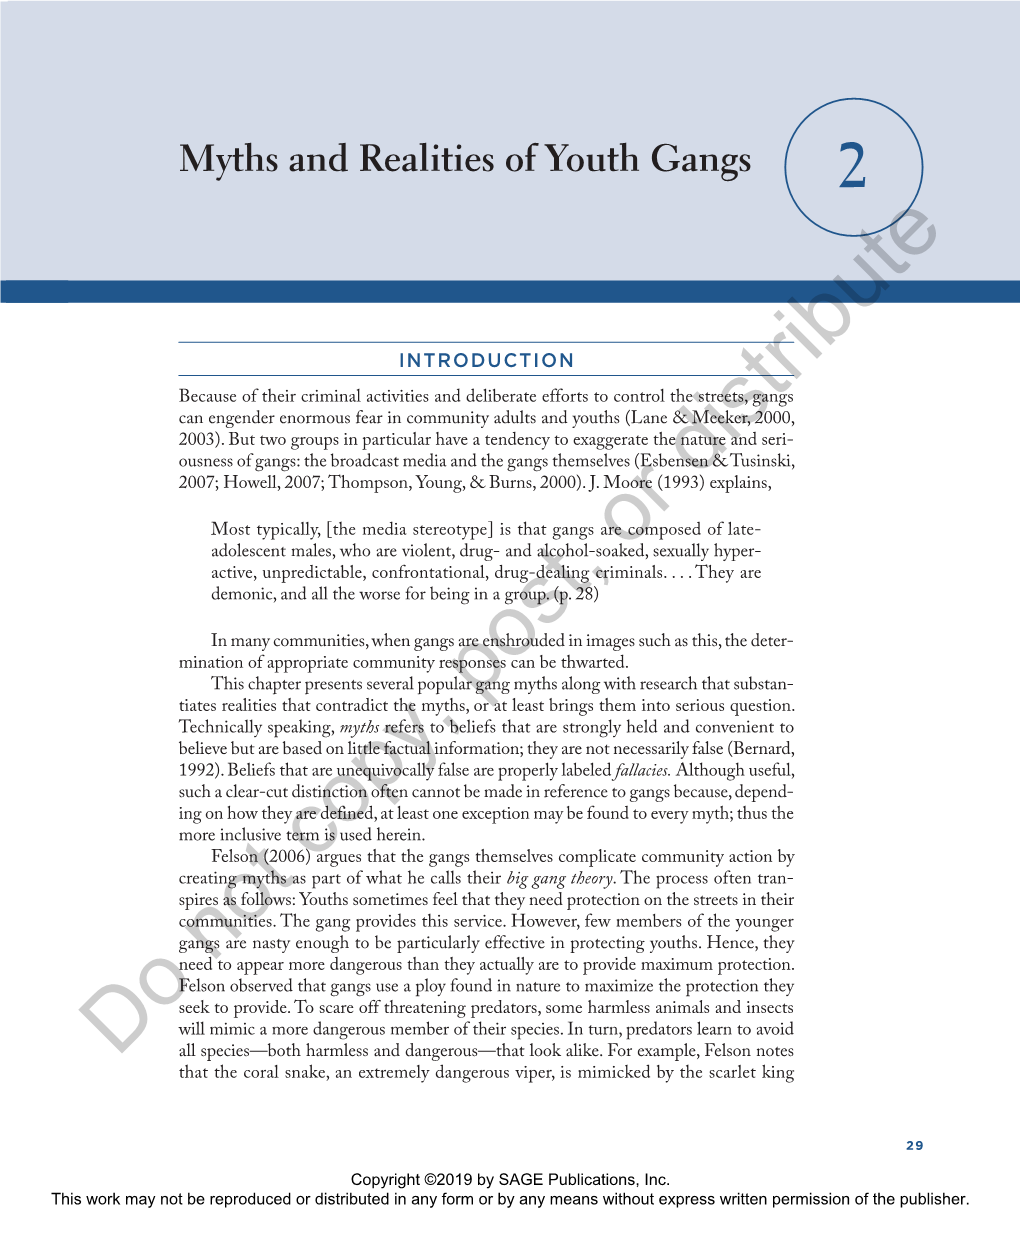 Chapter 2. Myths and Realities of Youth Gangs